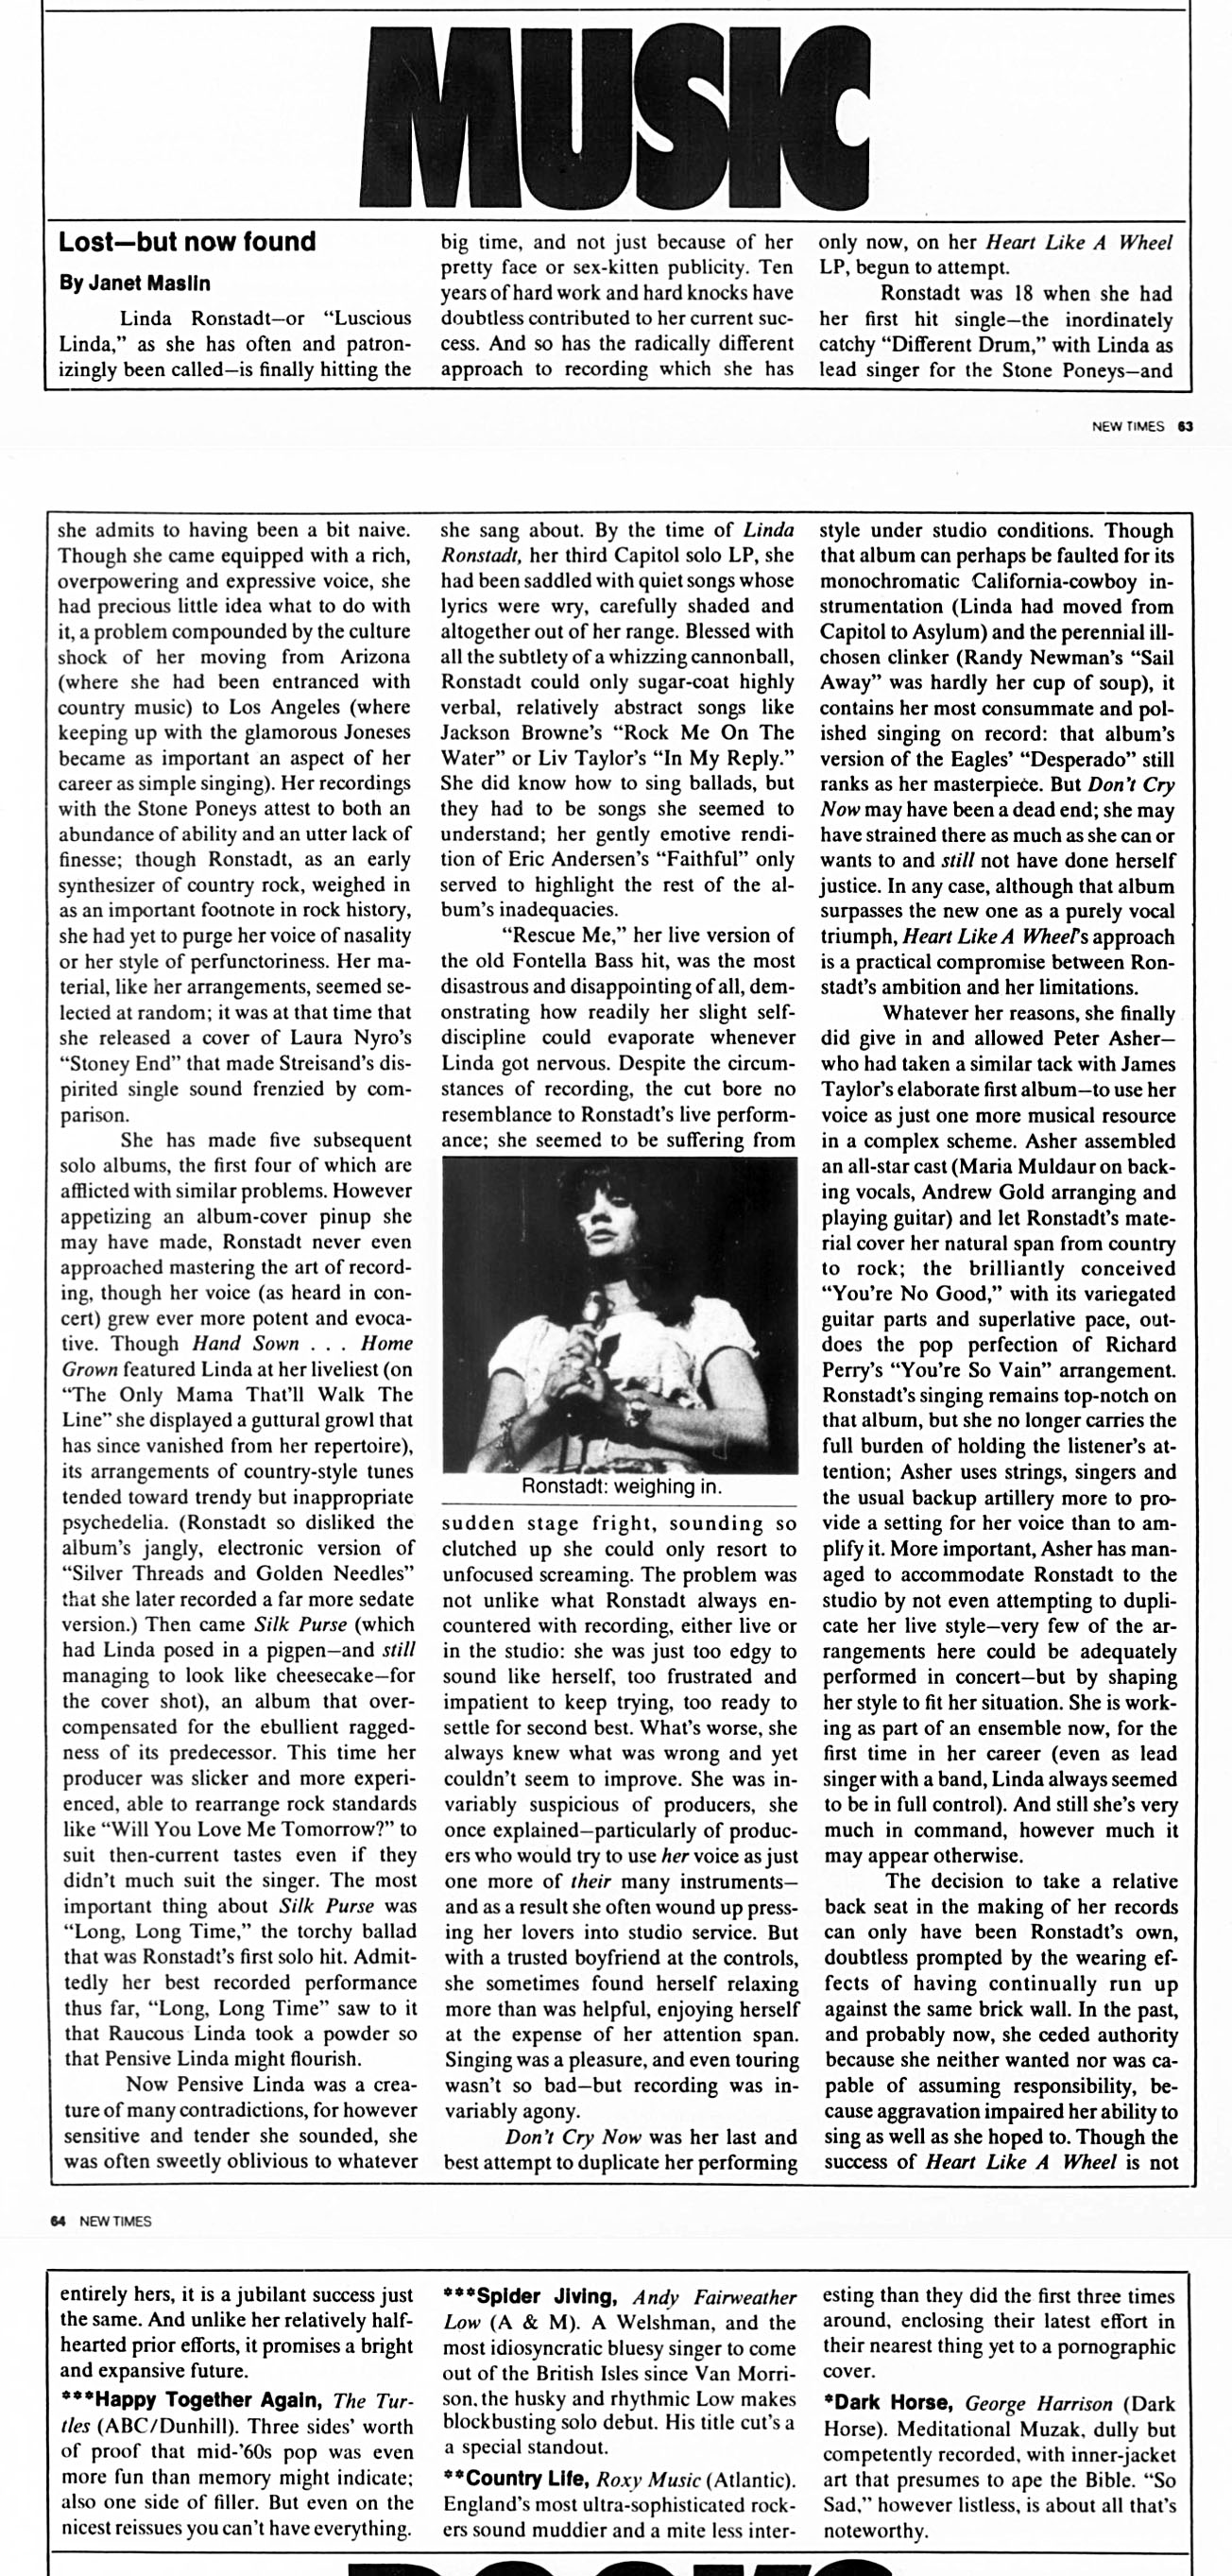 Linda Ronstadt New Times review/article